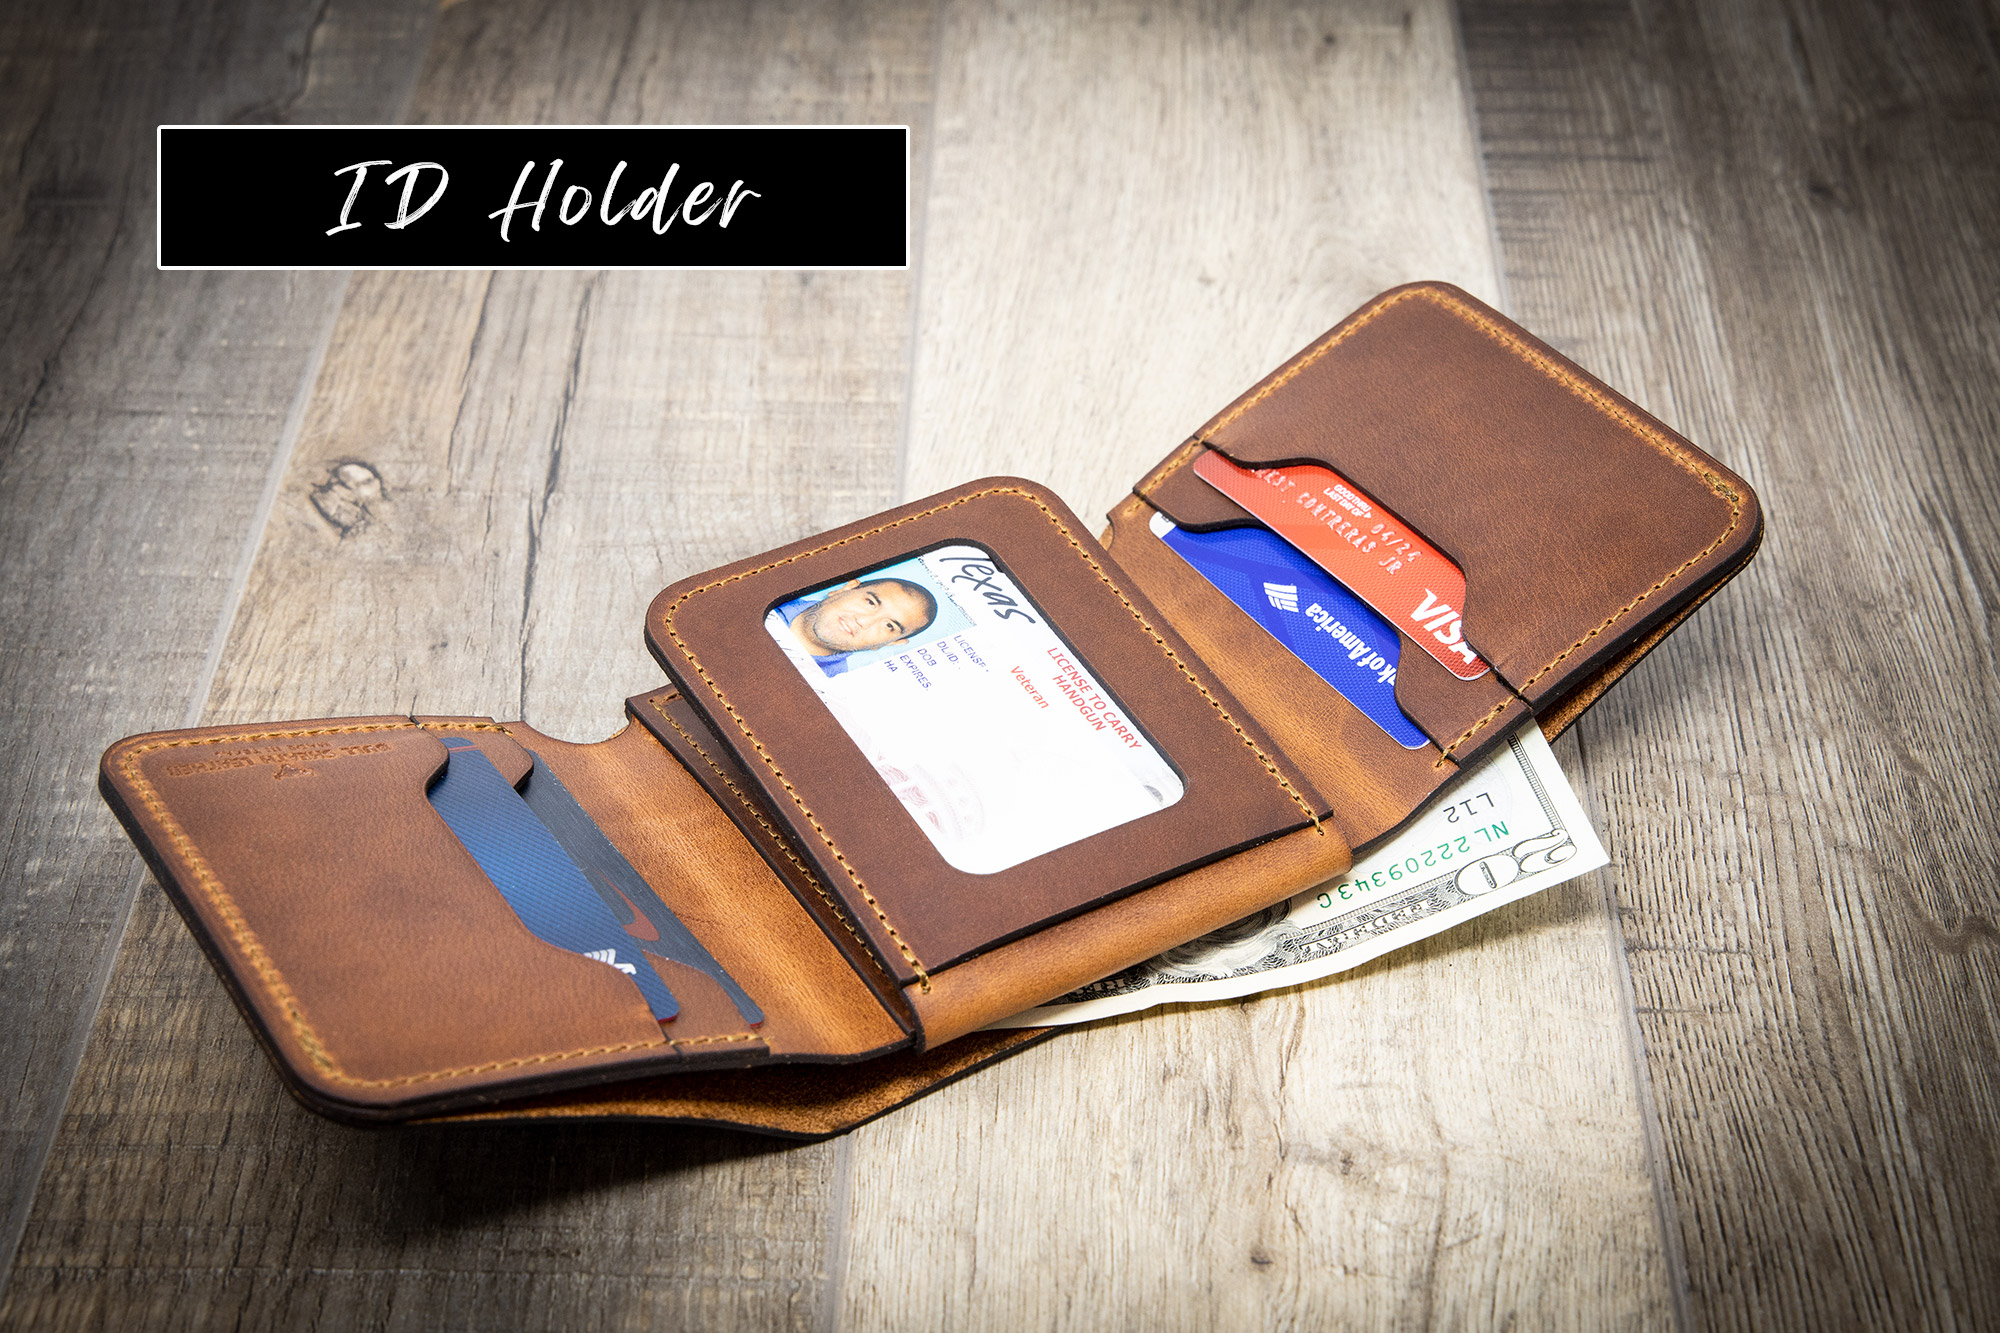 A trifold ID wallet with credit card slots and ID sections